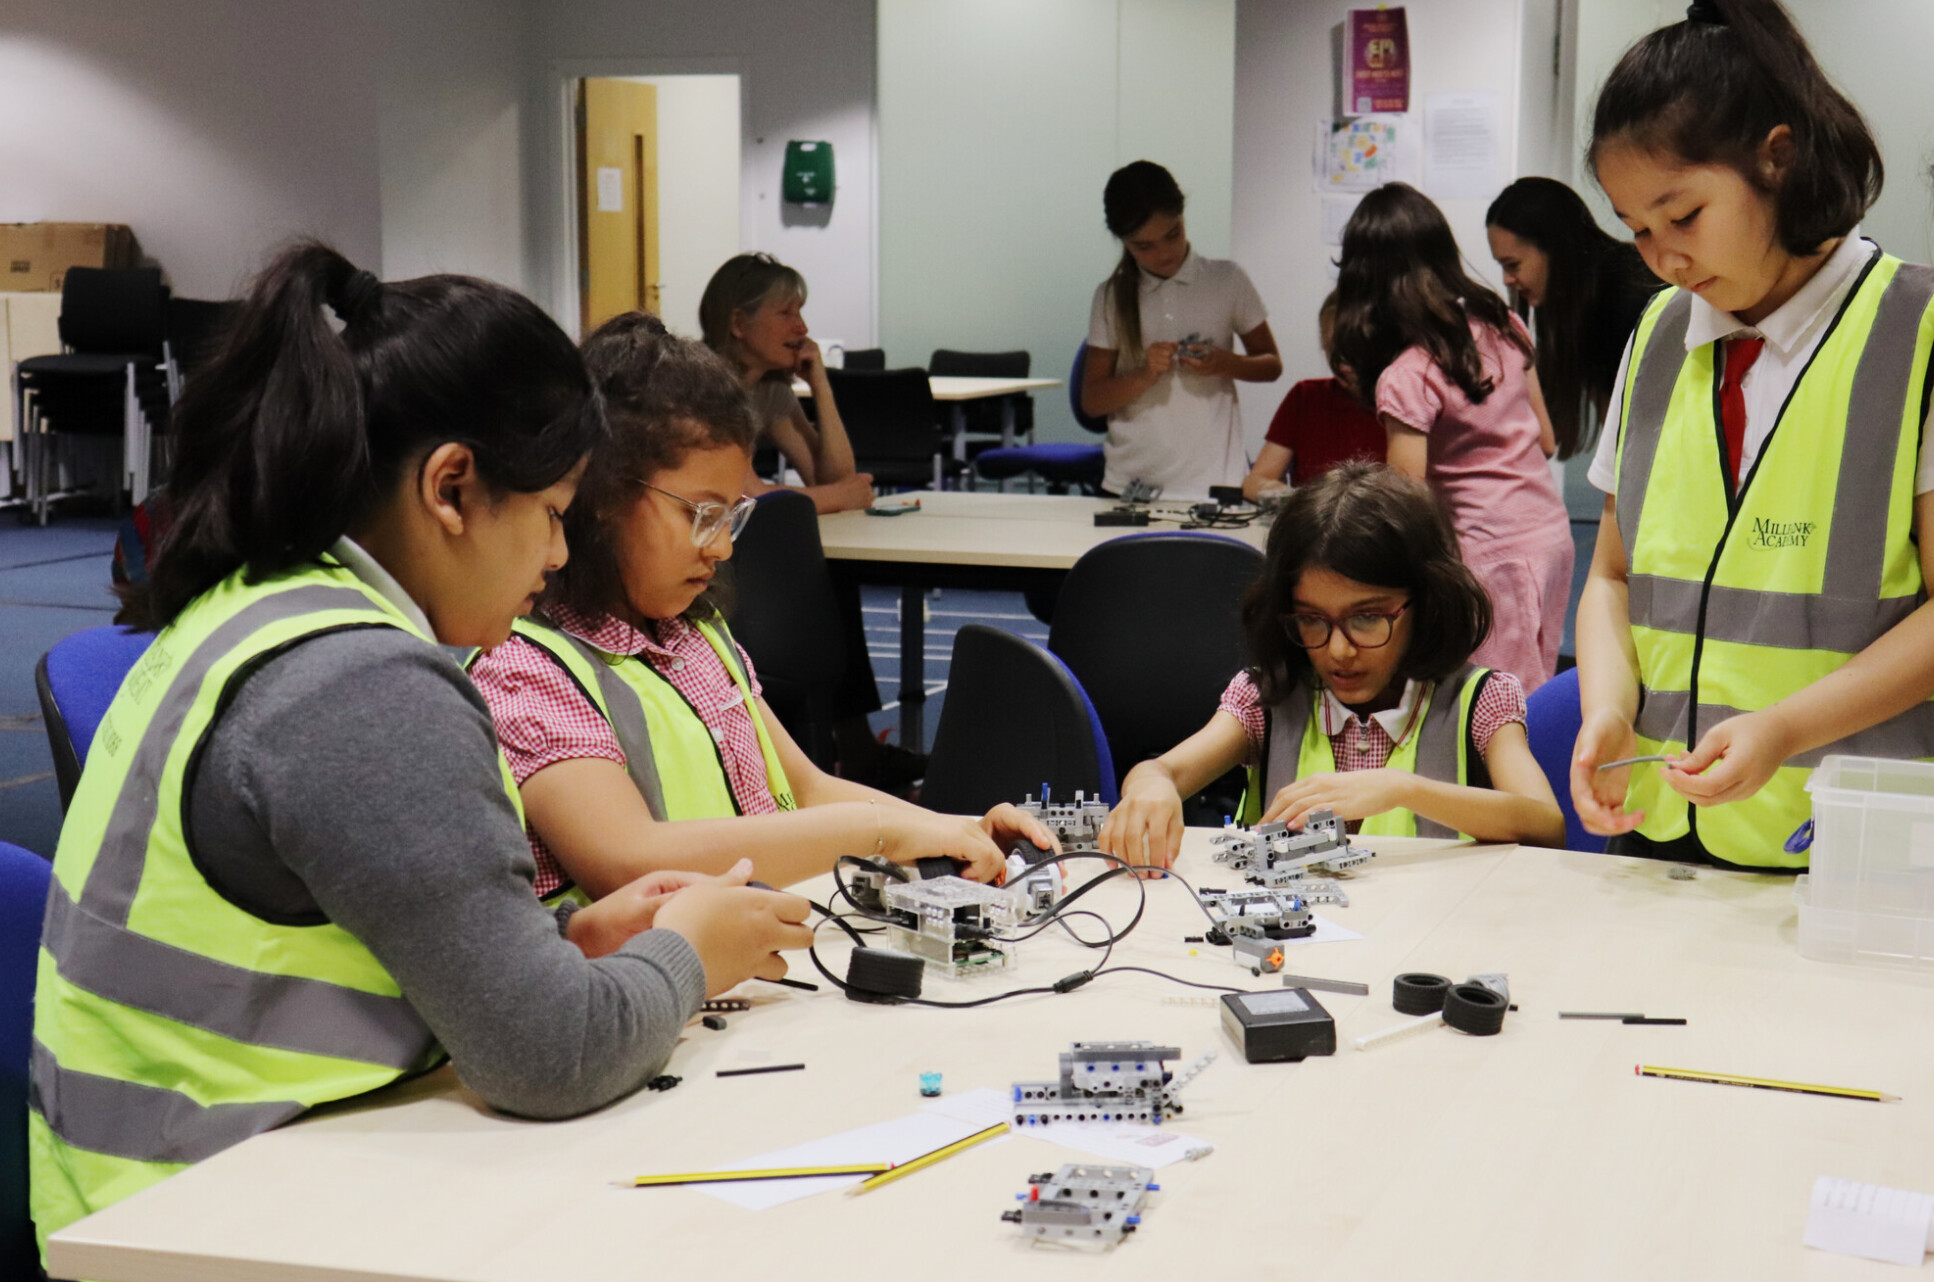 Young girls involved in computing activities